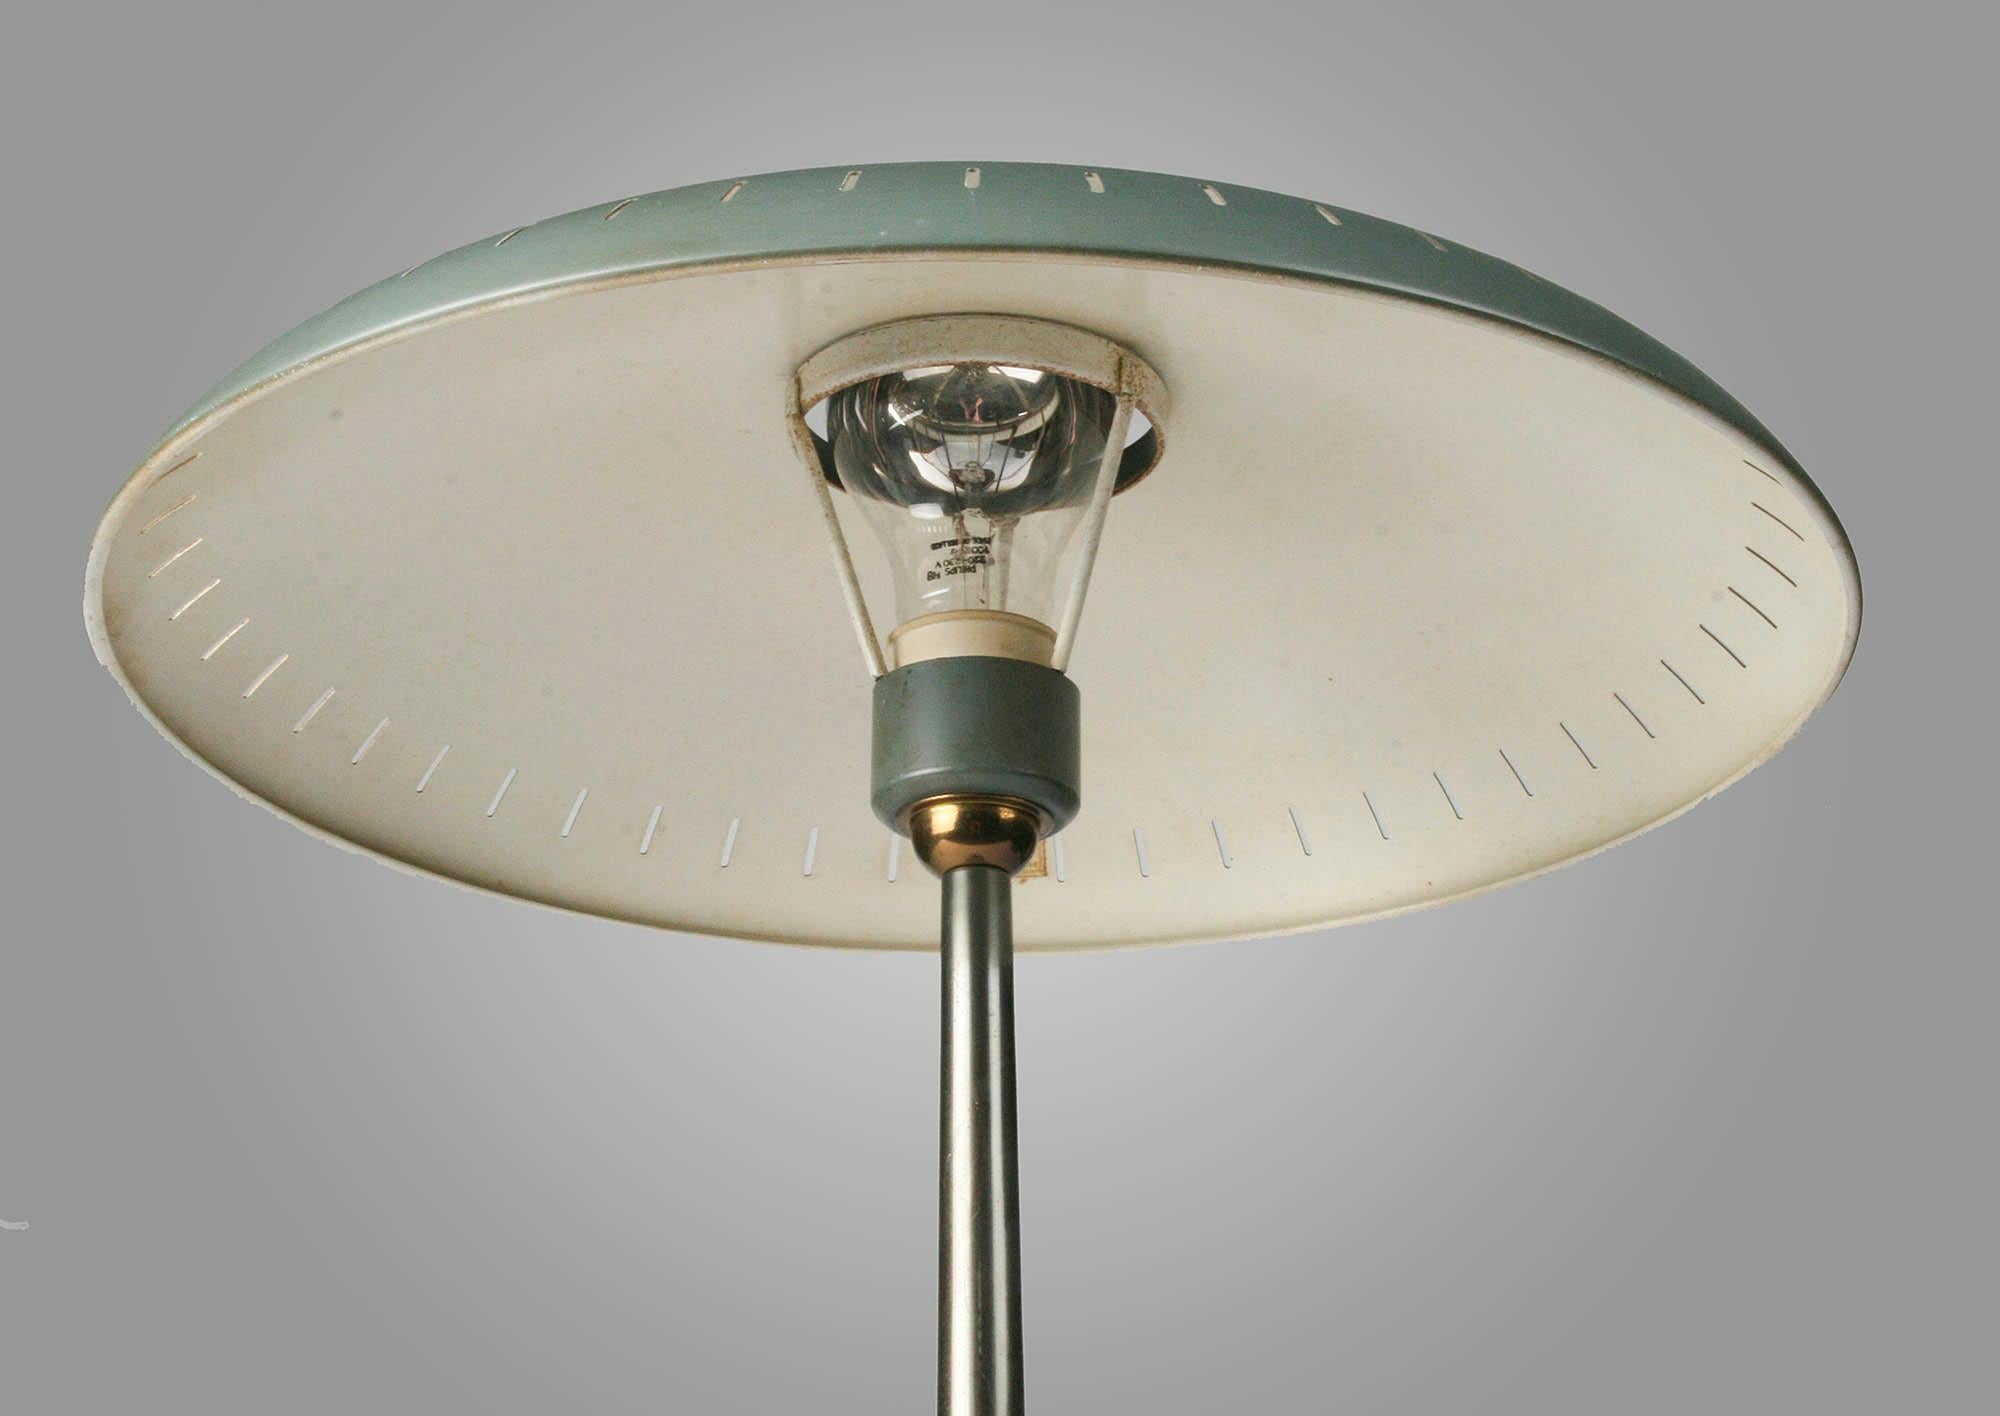 Metal Vintage Design Table Lamp from Philips, Design by Louis Kalff, Mid-20th Century